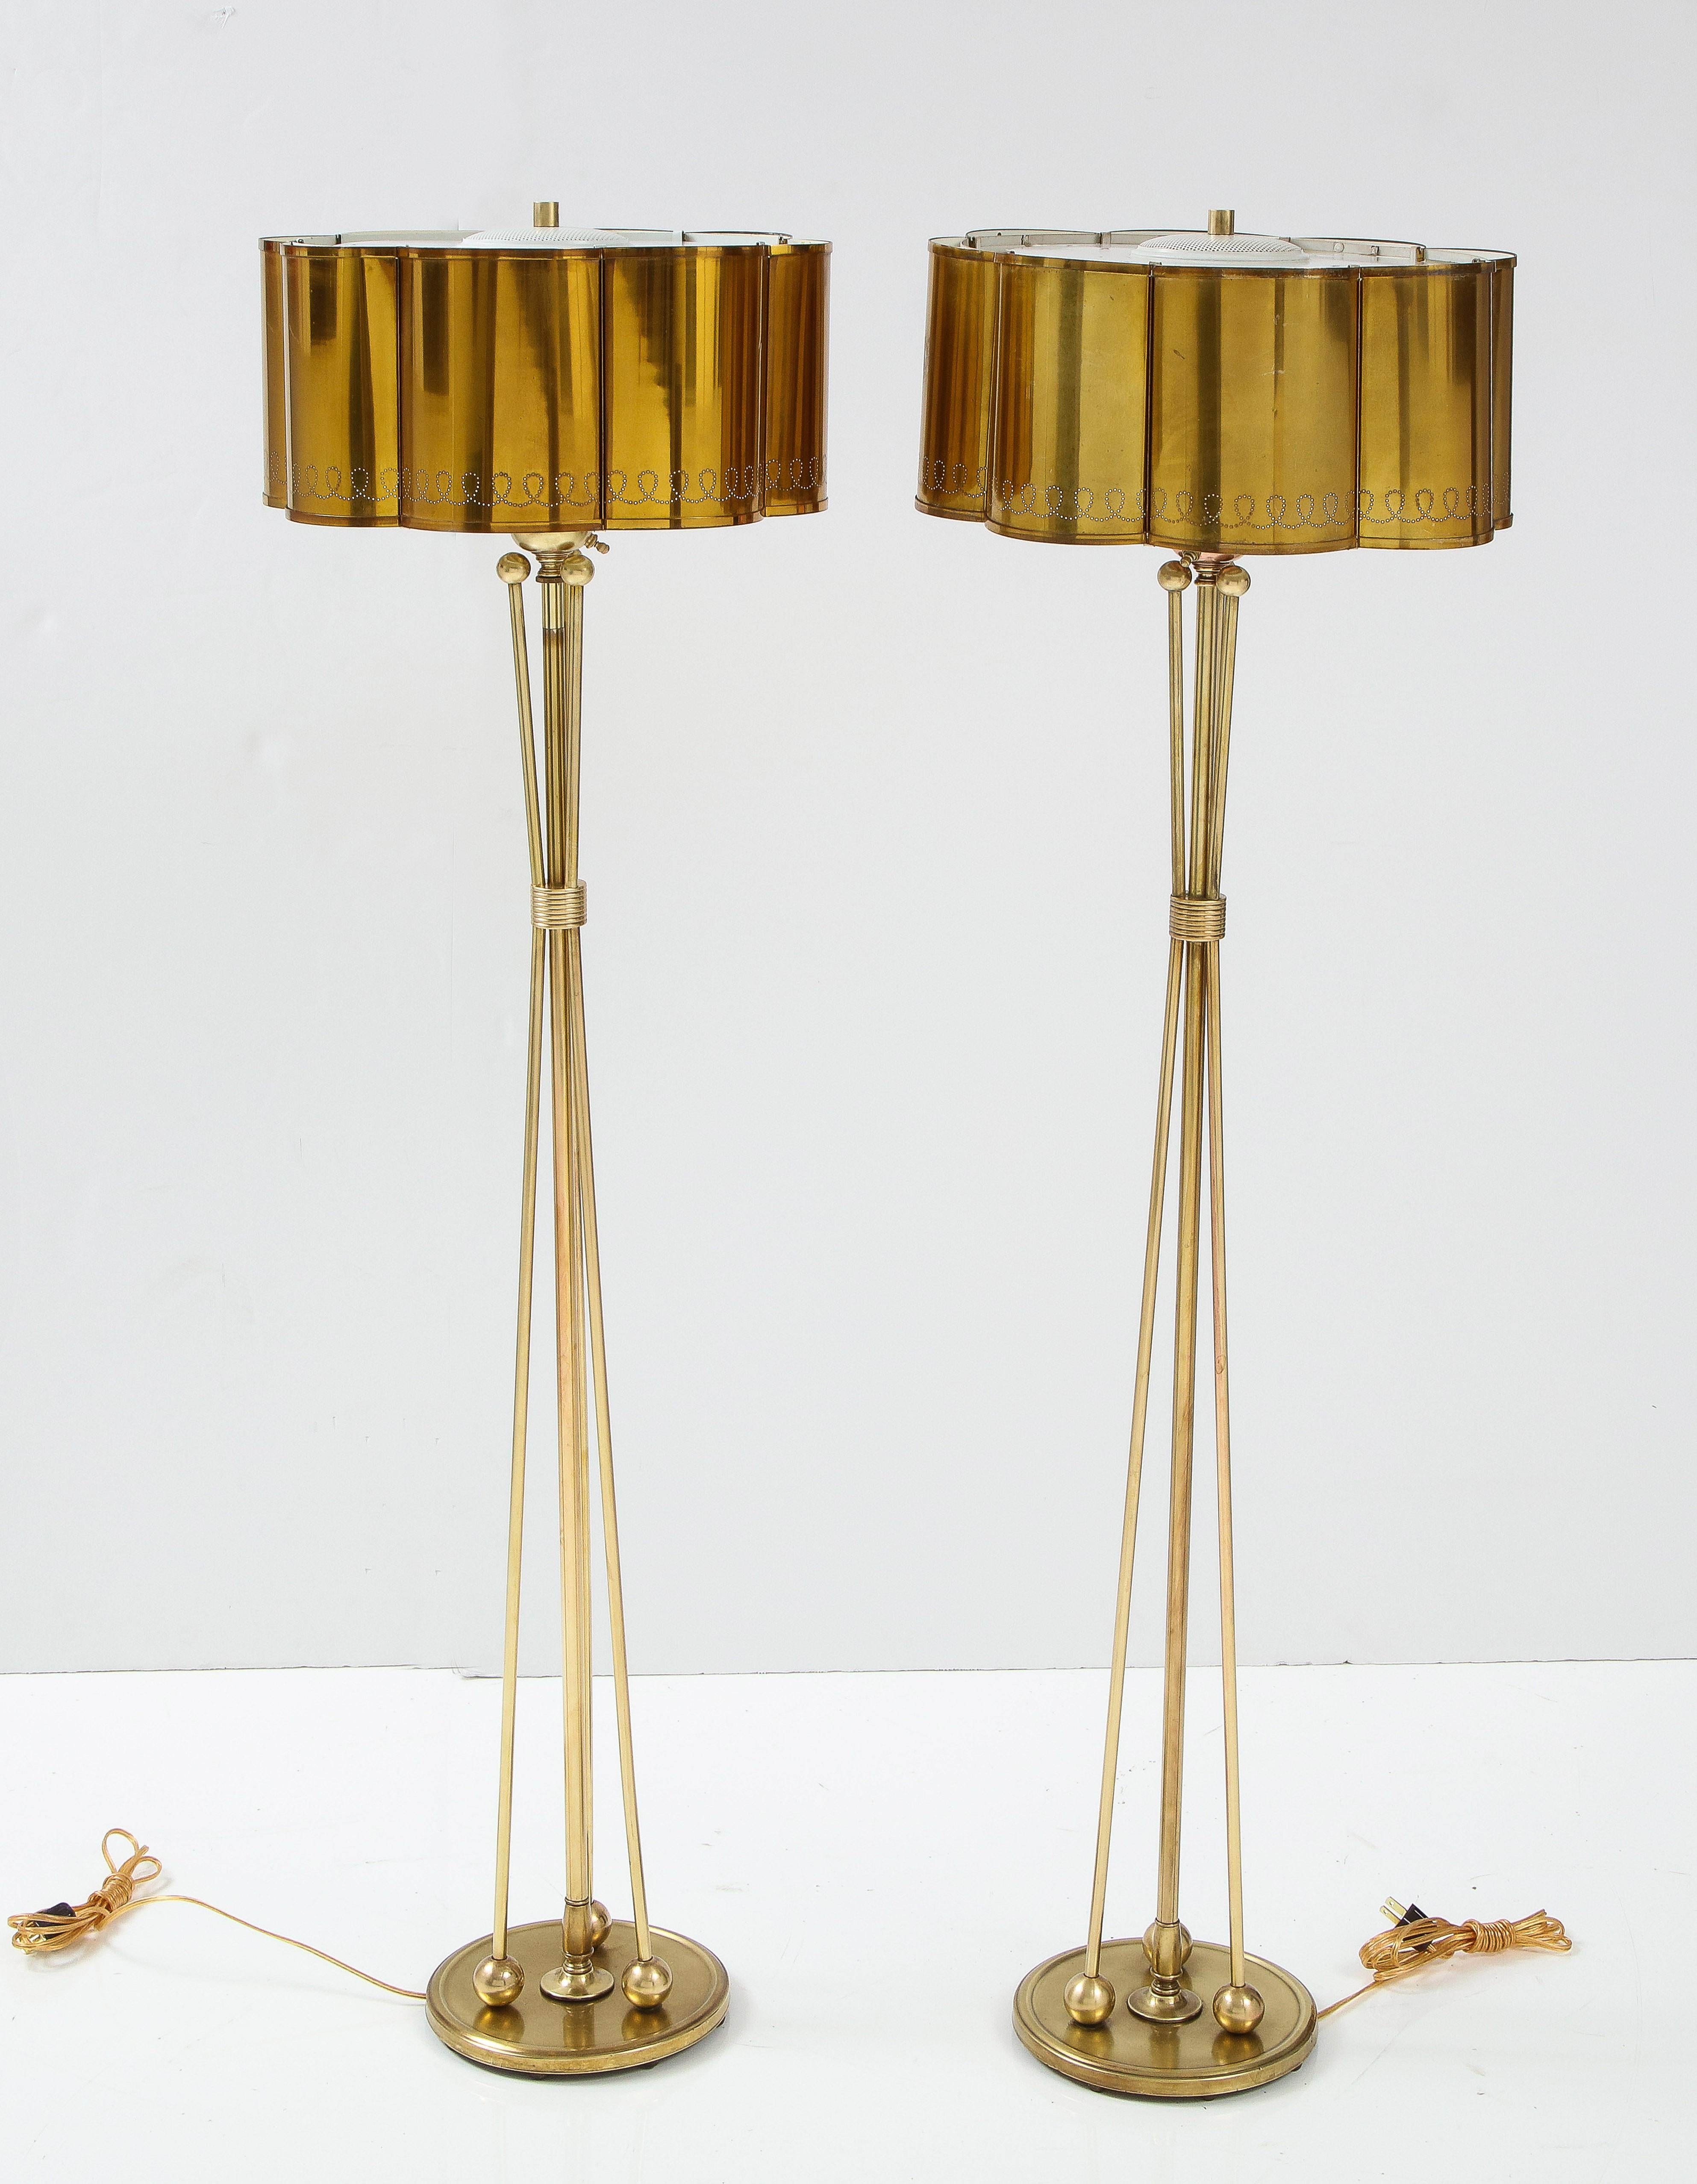 1950's French Solid Brass with Perforated Lamps Shades Tripod Floor Lamps 3